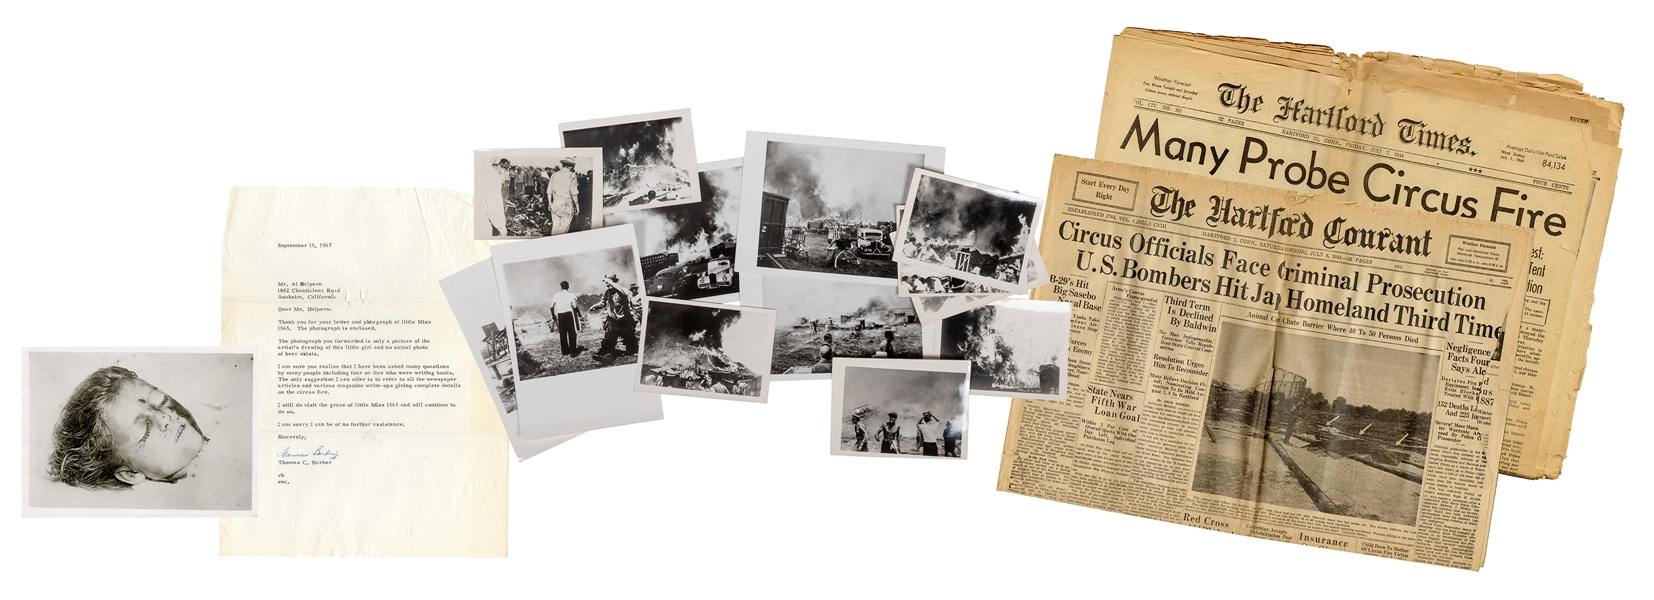 Snapshots and Newspapers of the Hartford Circus Fire, 1944.